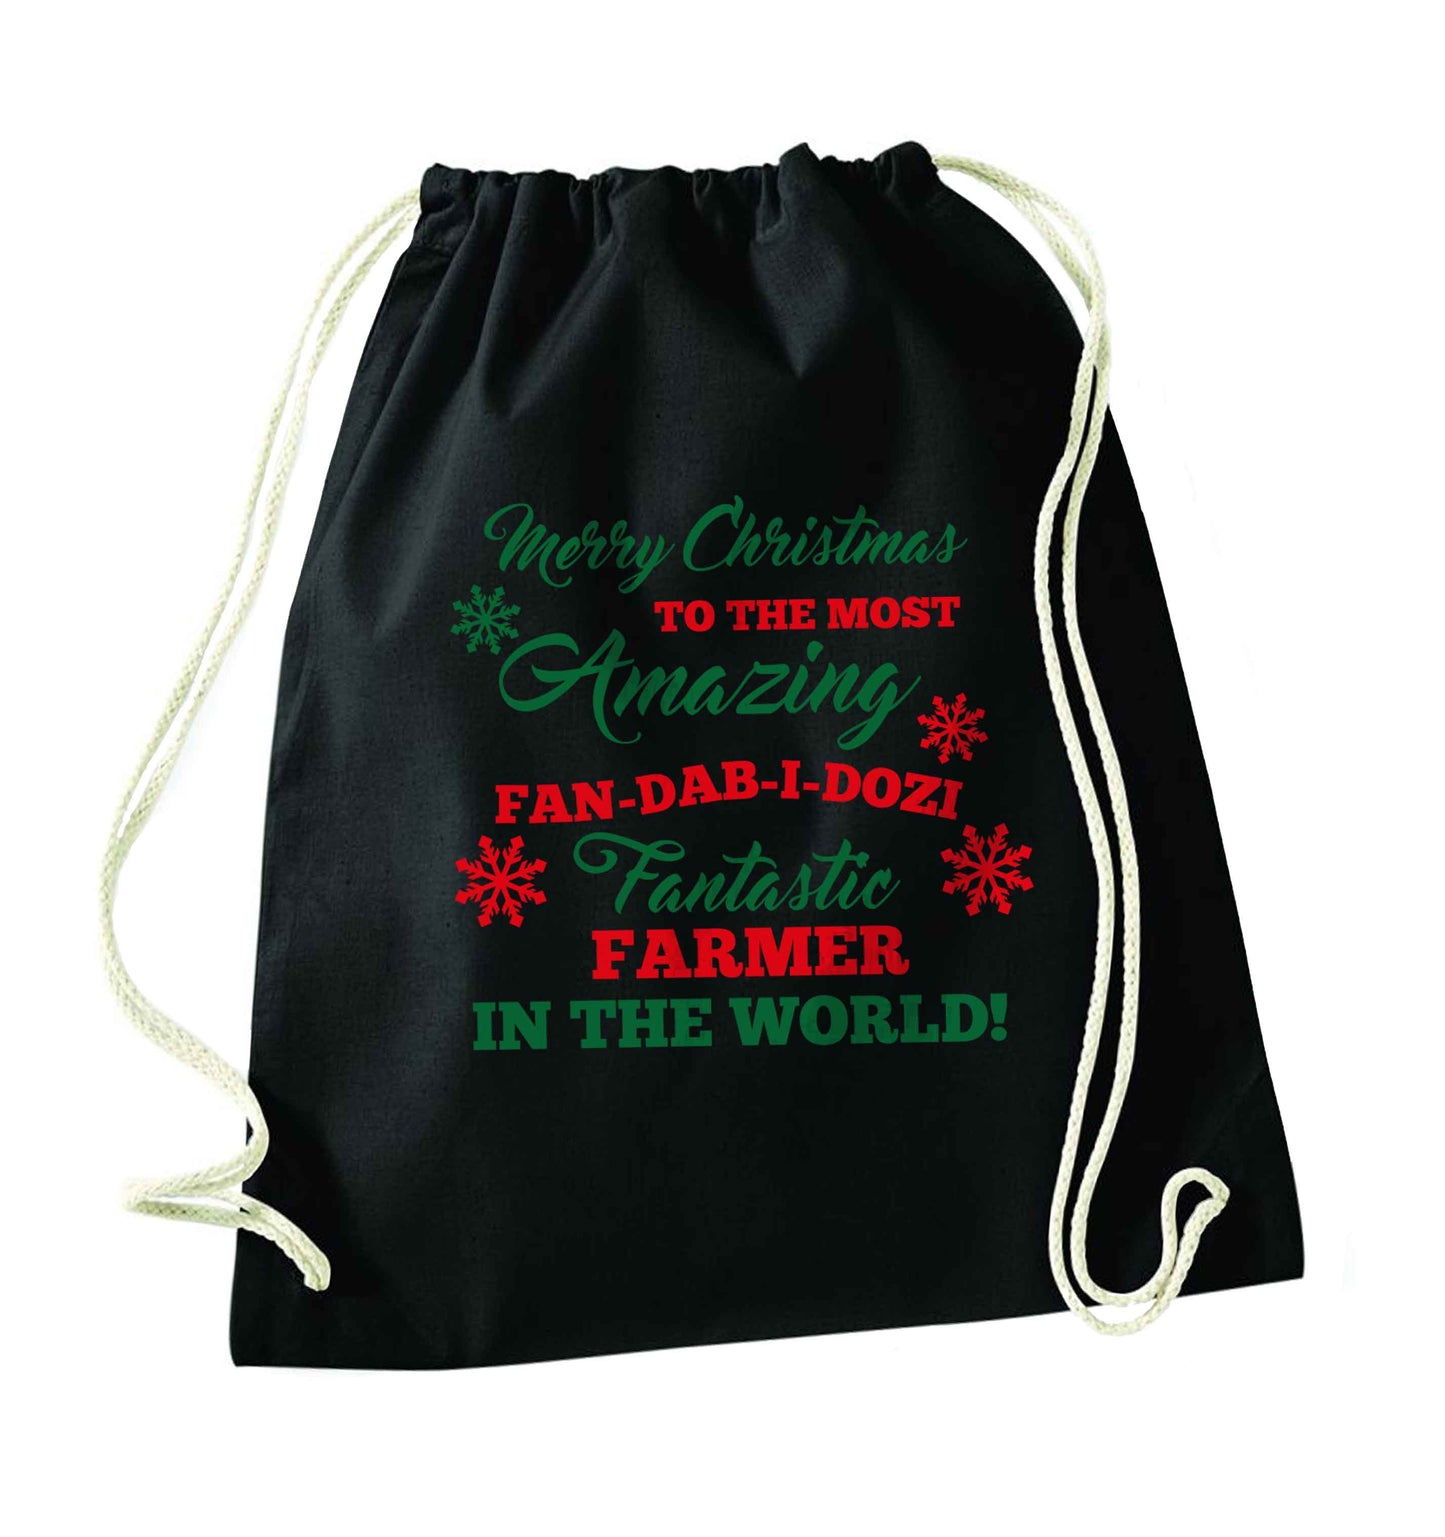 Merry Christmas to the most amazing farmer in the world! black drawstring bag